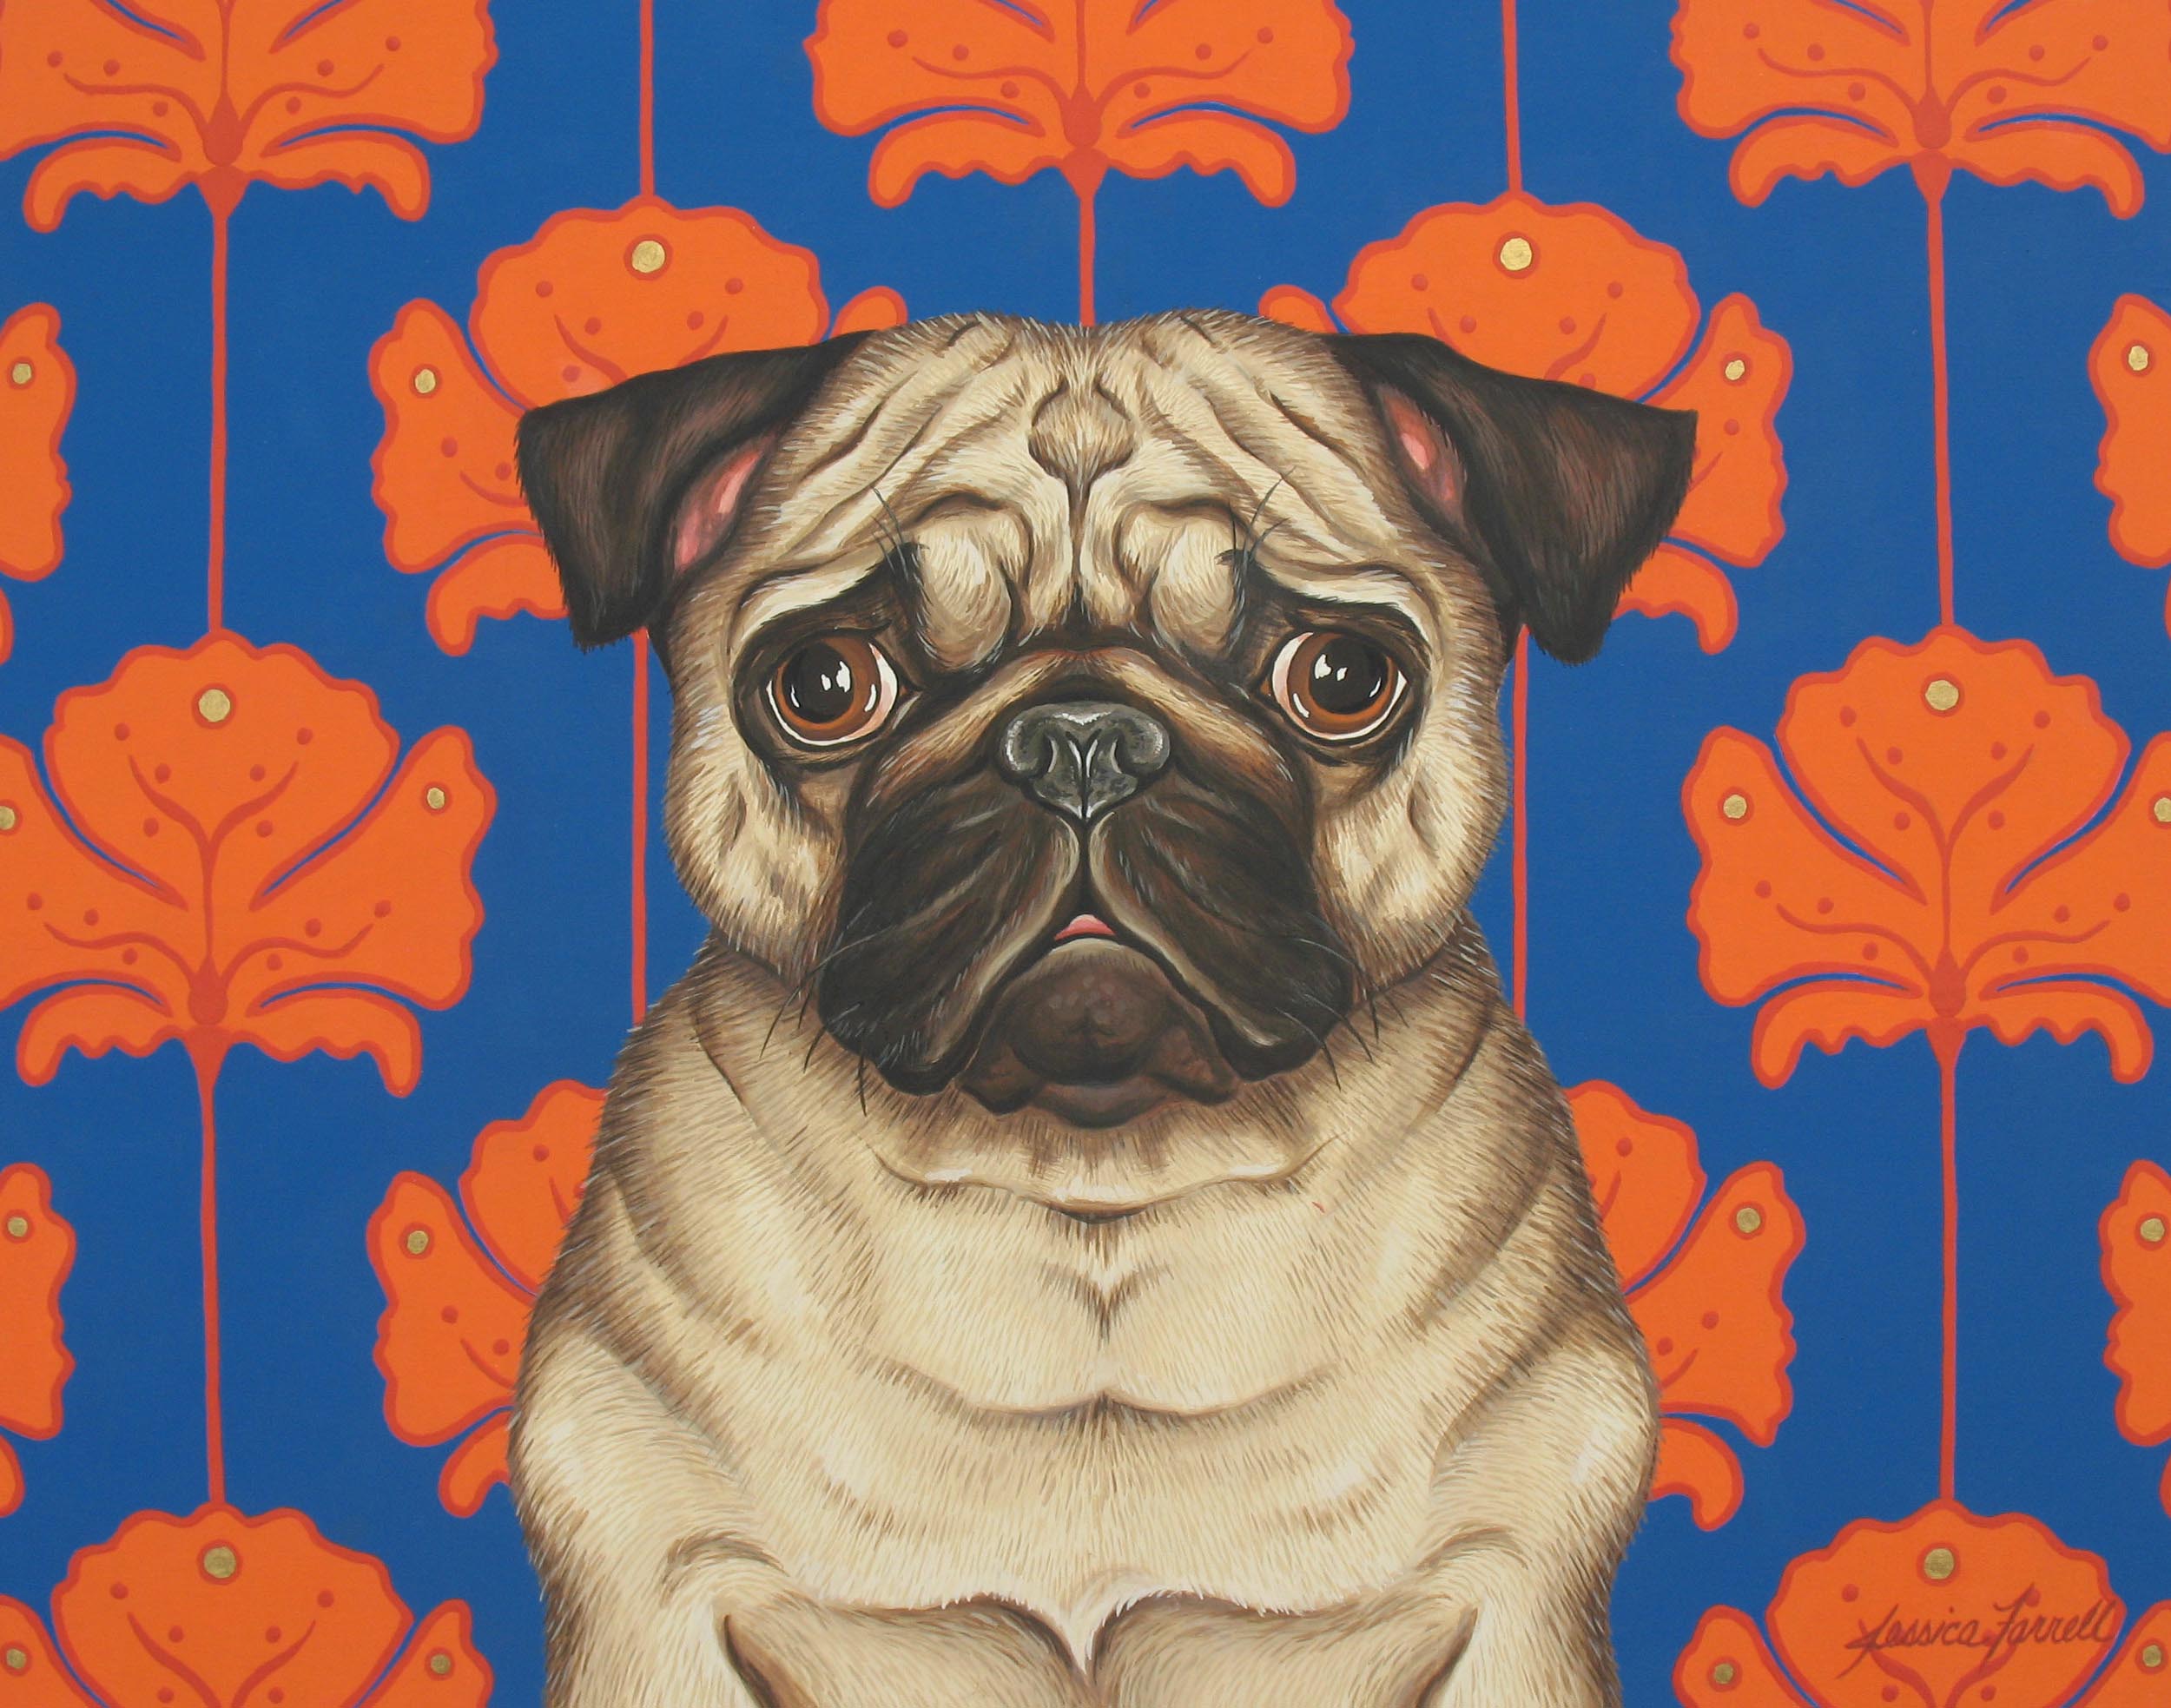   Pug    (private collection) 